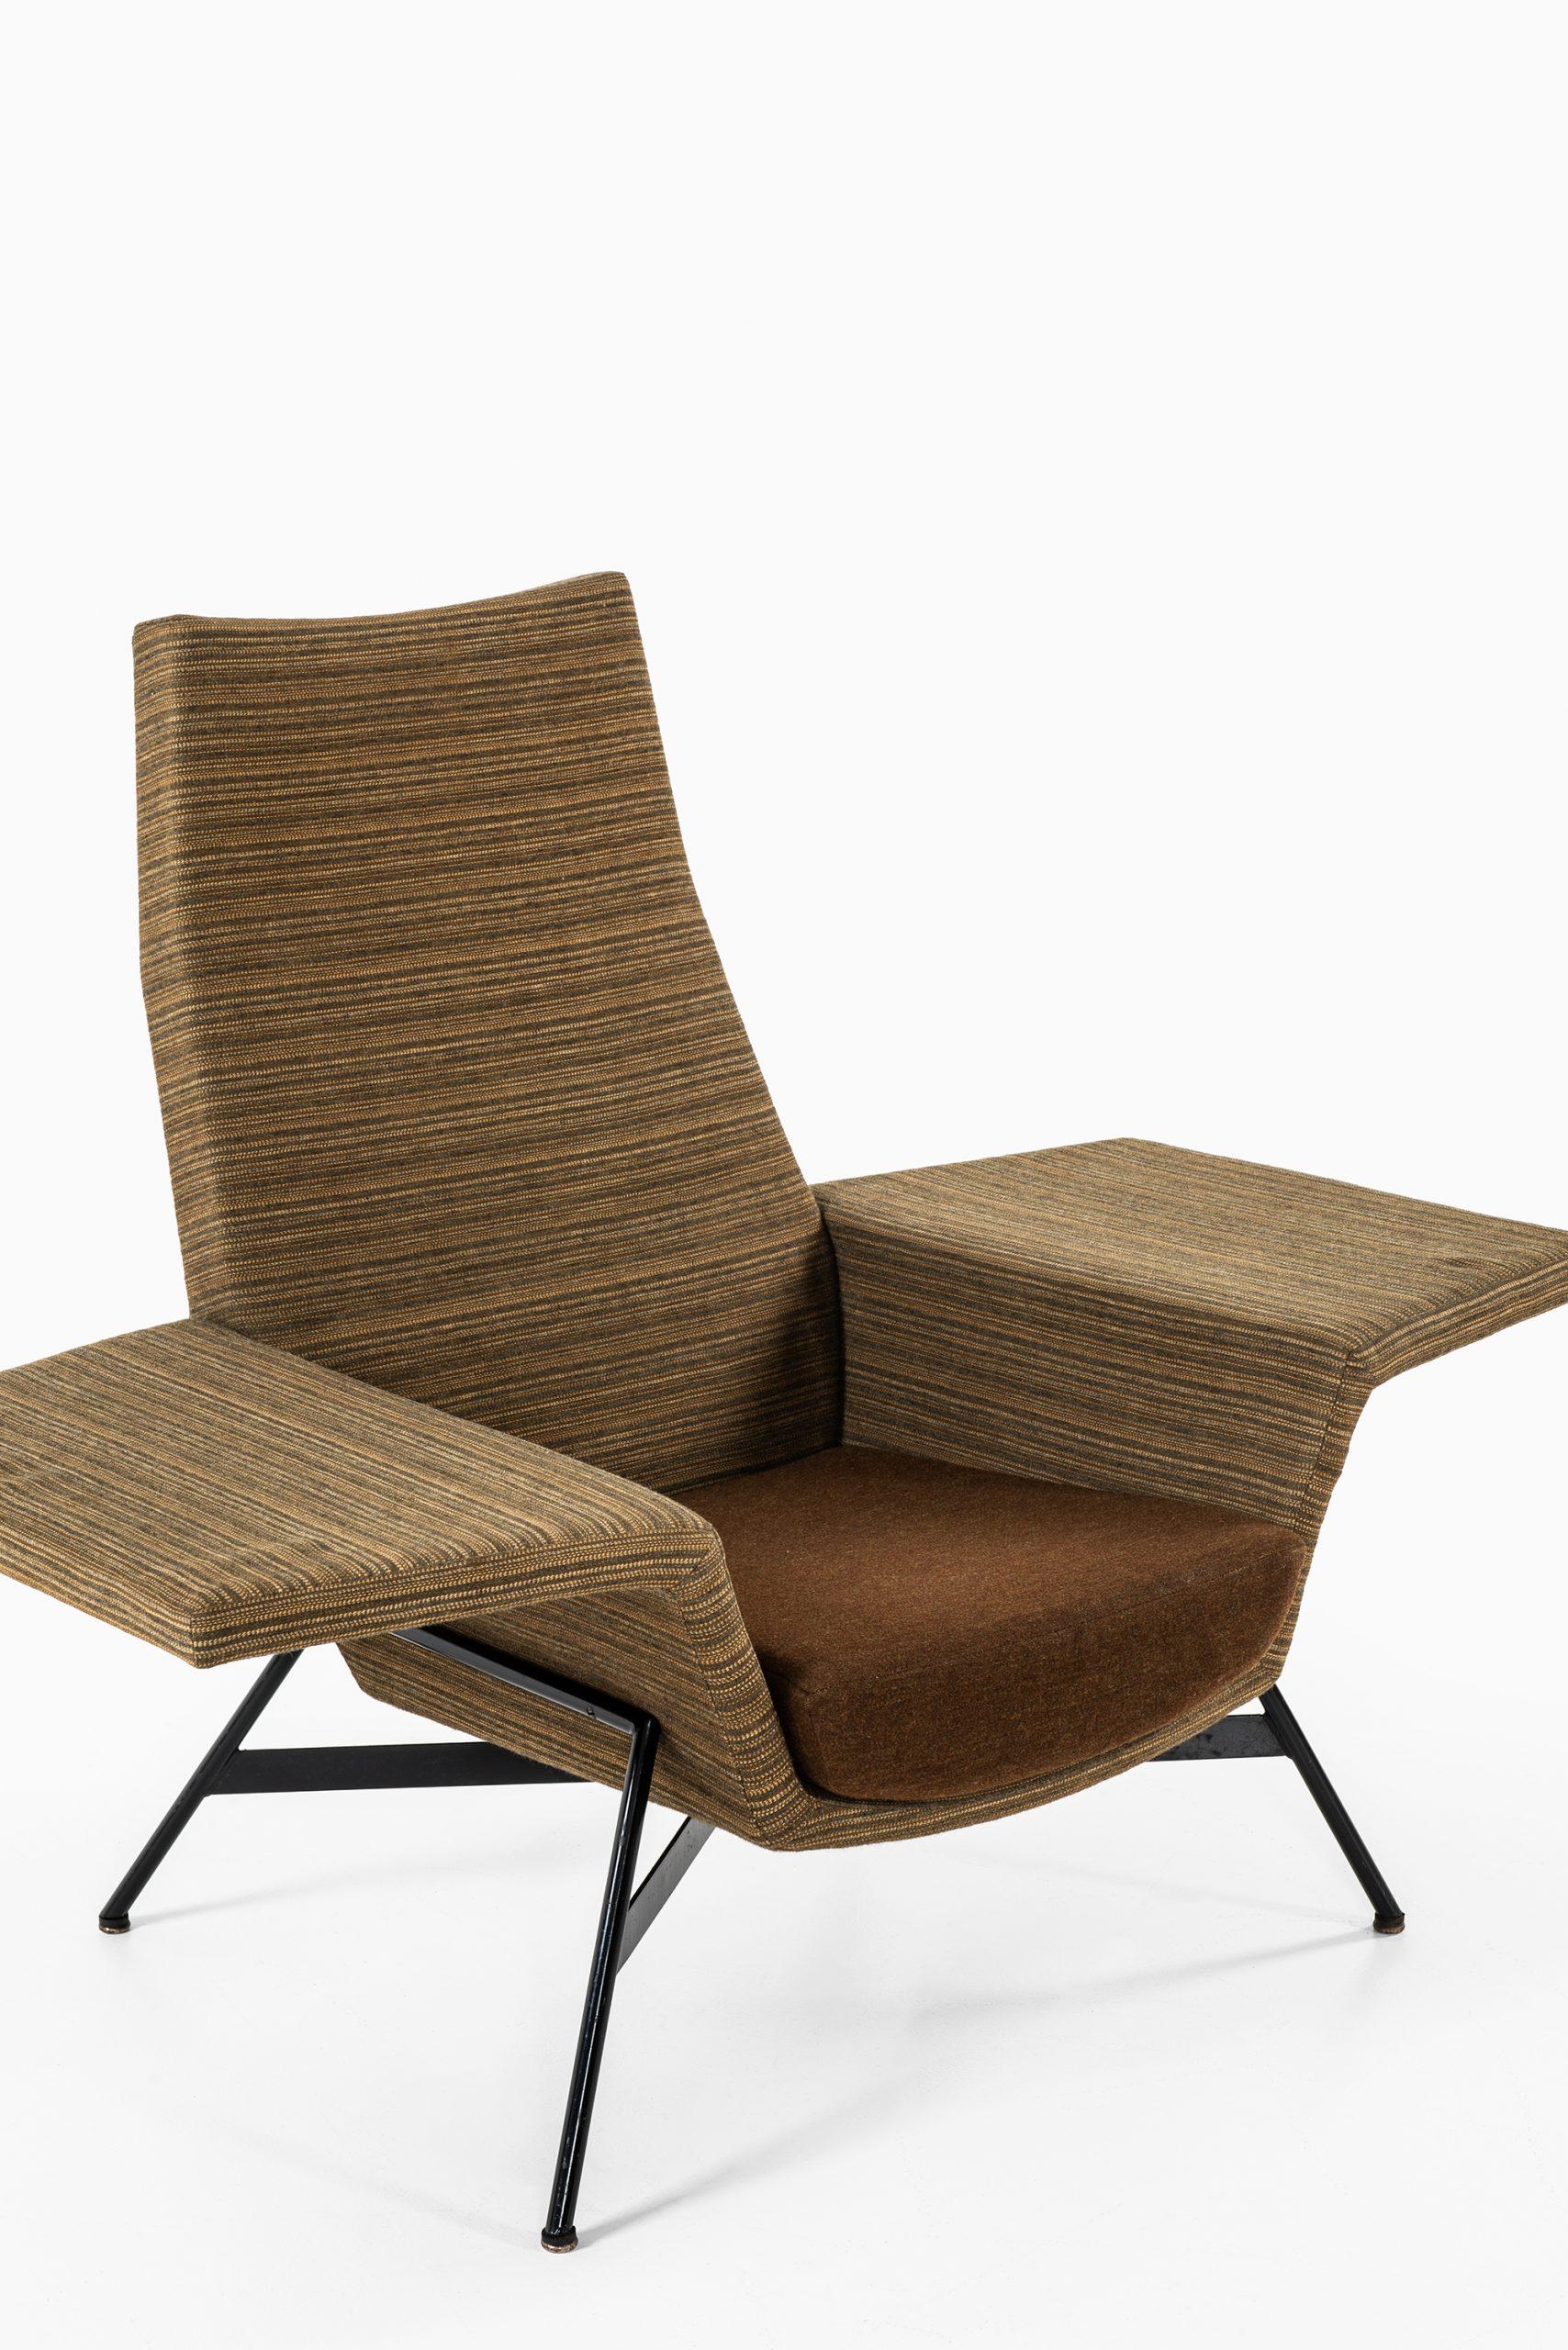 Mid-20th Century Otto Kolbe Easy Chair Produced by Walter Knoll in America For Sale